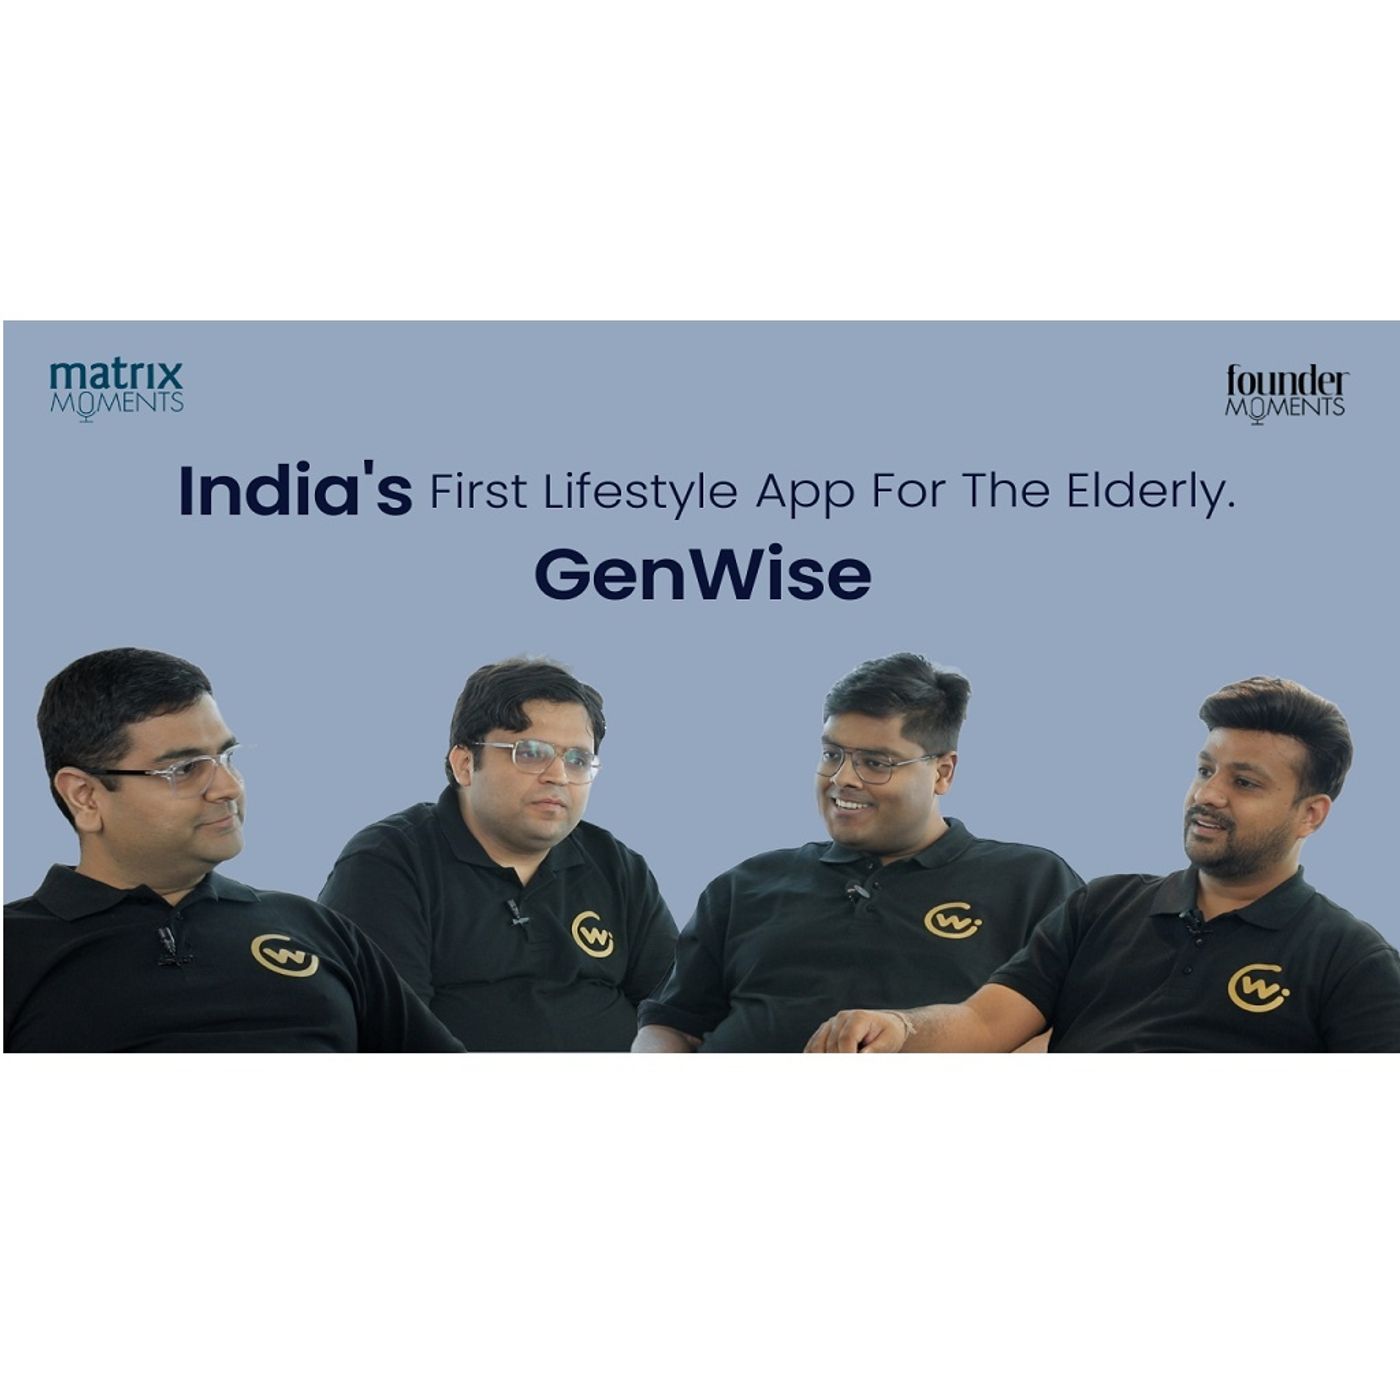 173: Matrix Moments: India's First Lifestyle App For The Elderly, GenWise